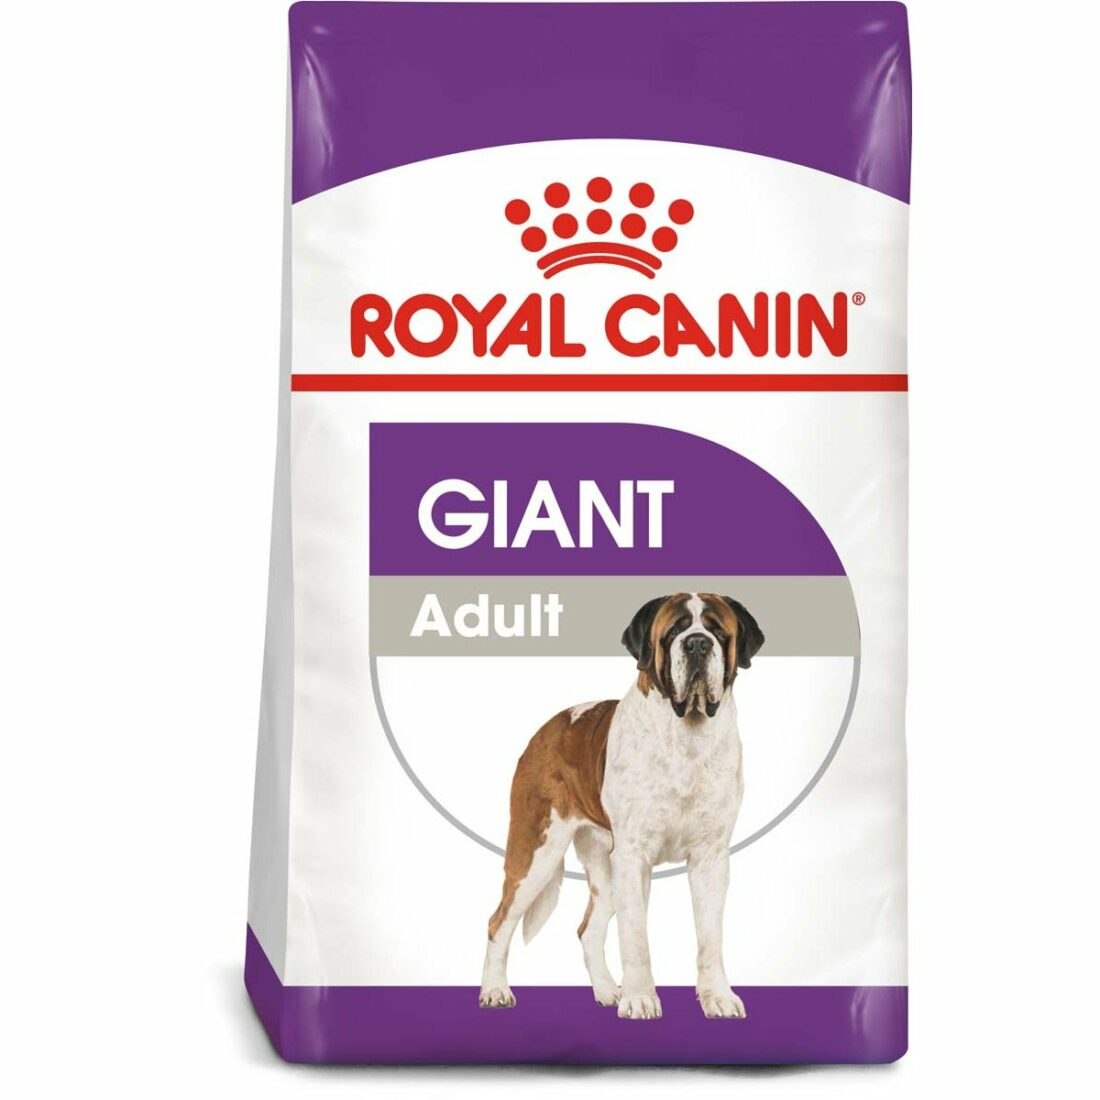 ROYAL CANIN GIANT Adult 2